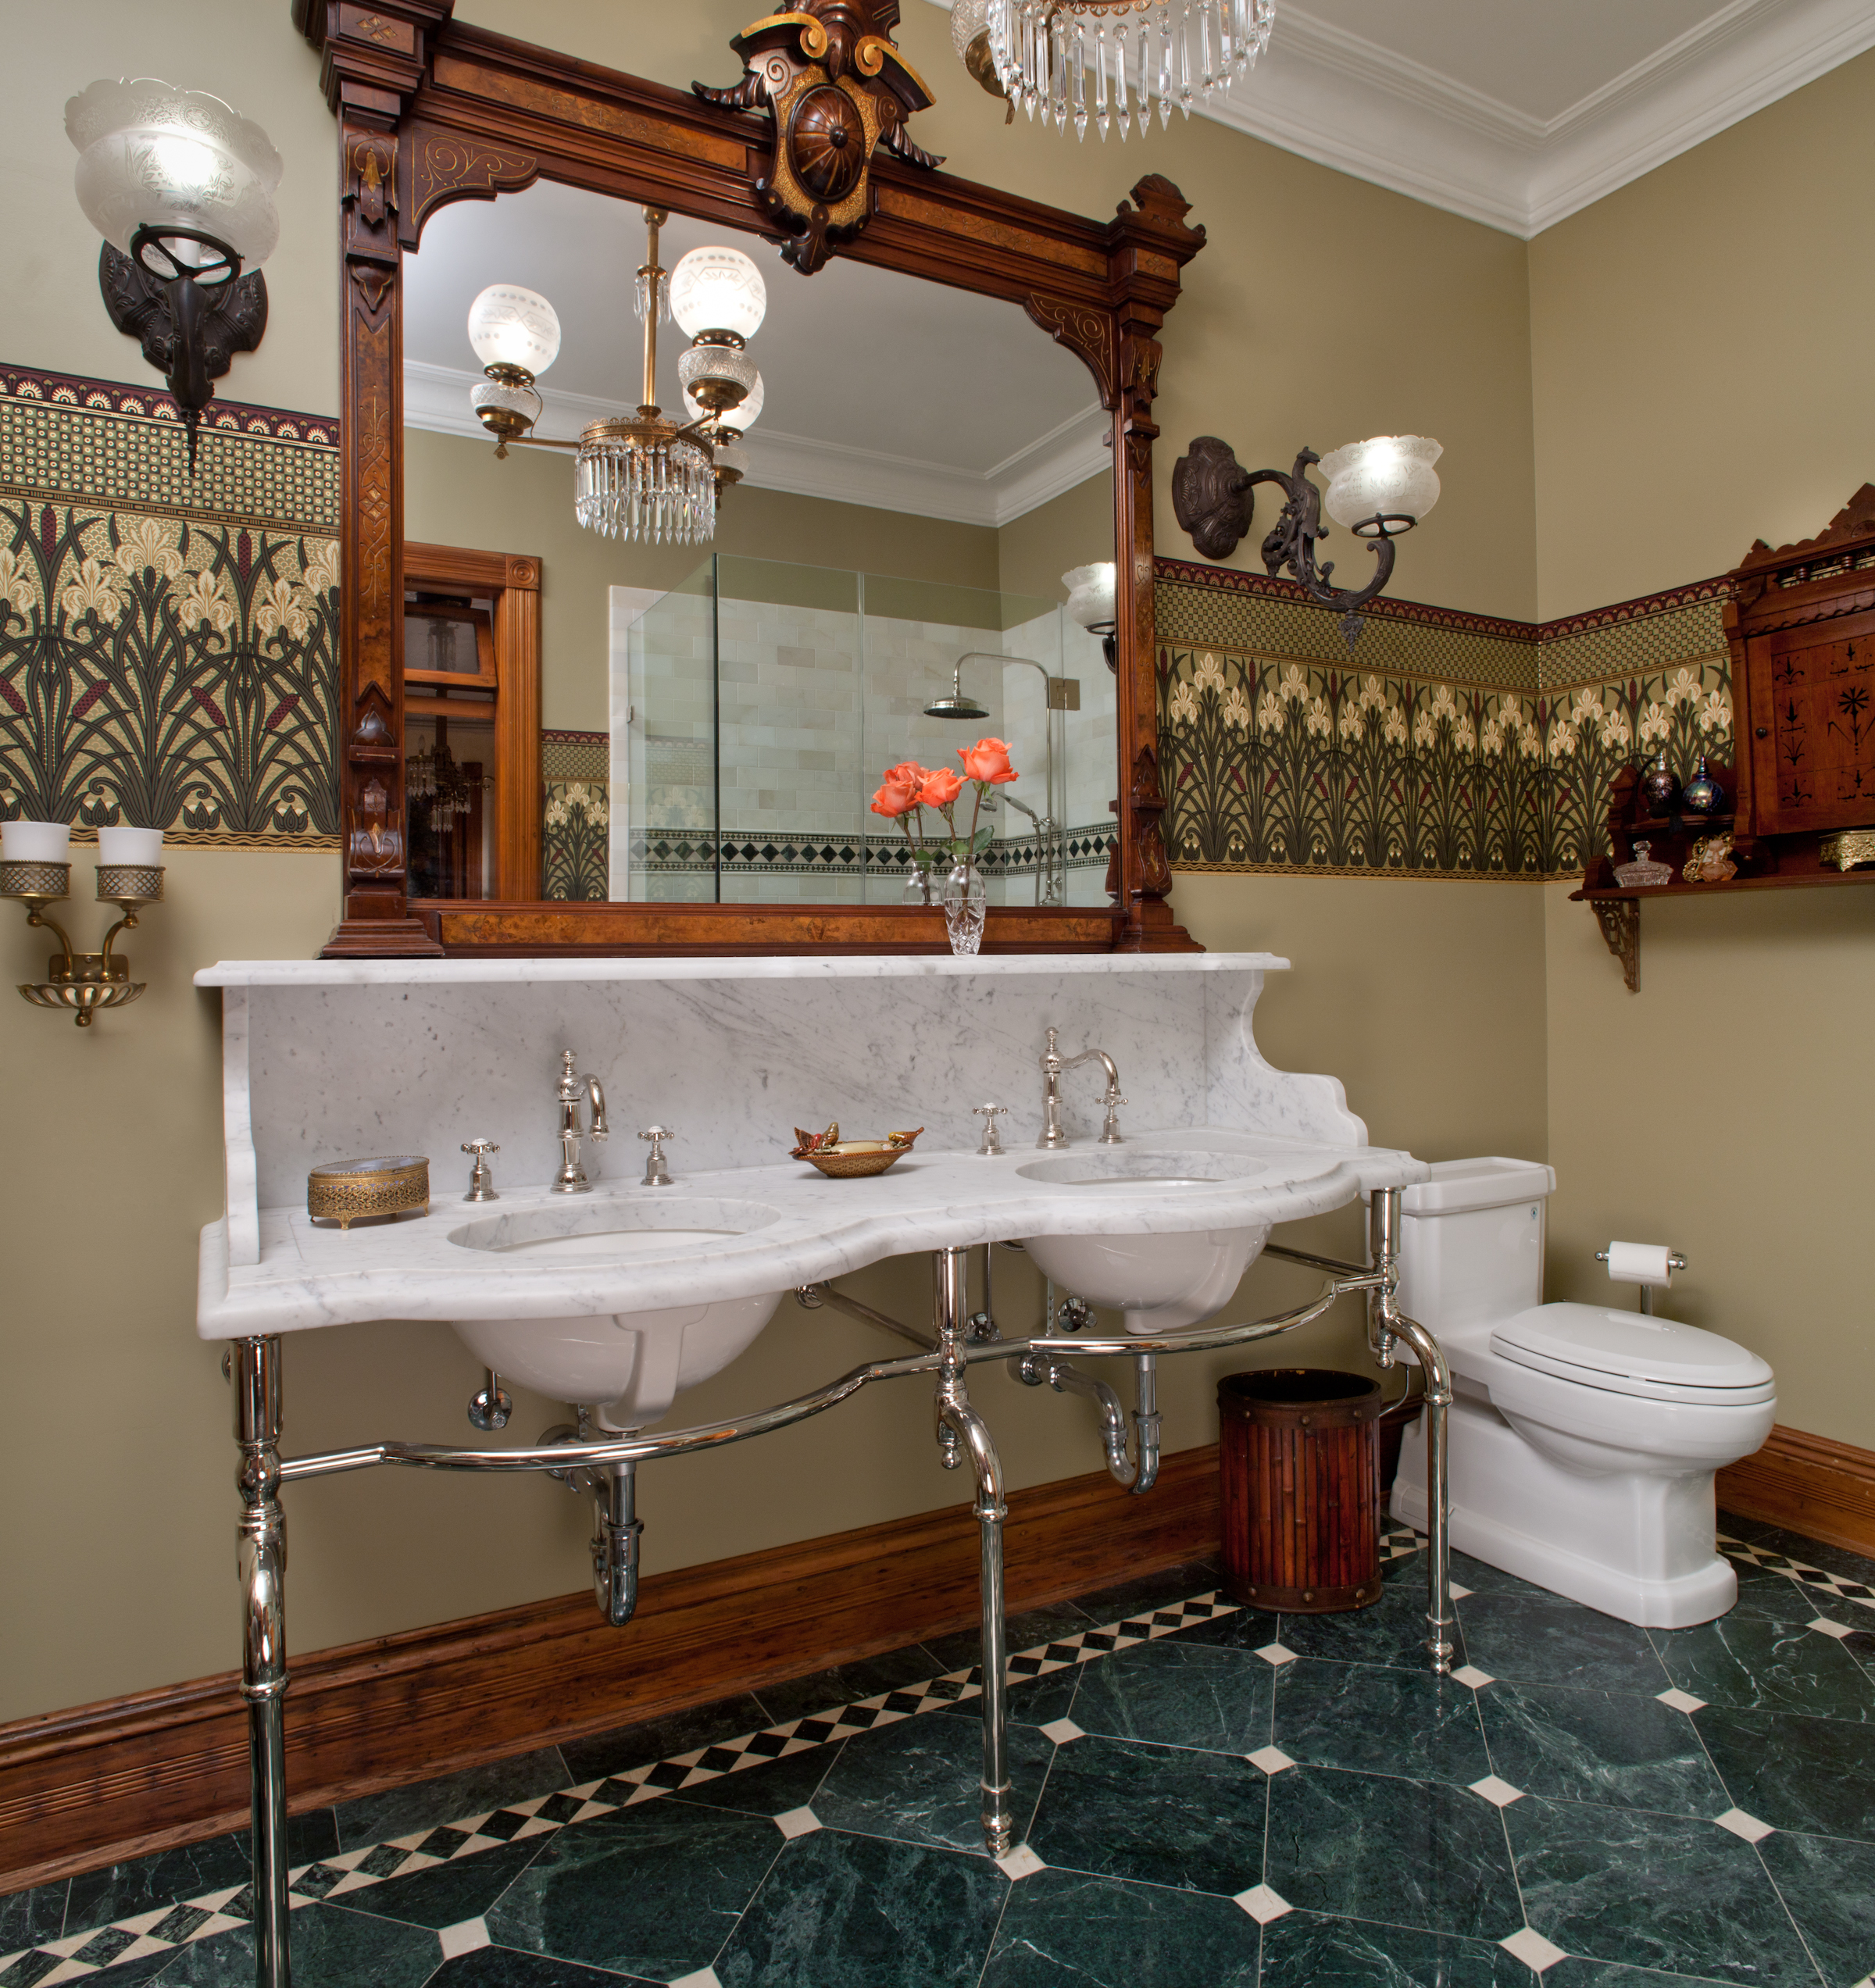 Traditional historic bathroom with dual marble sinks